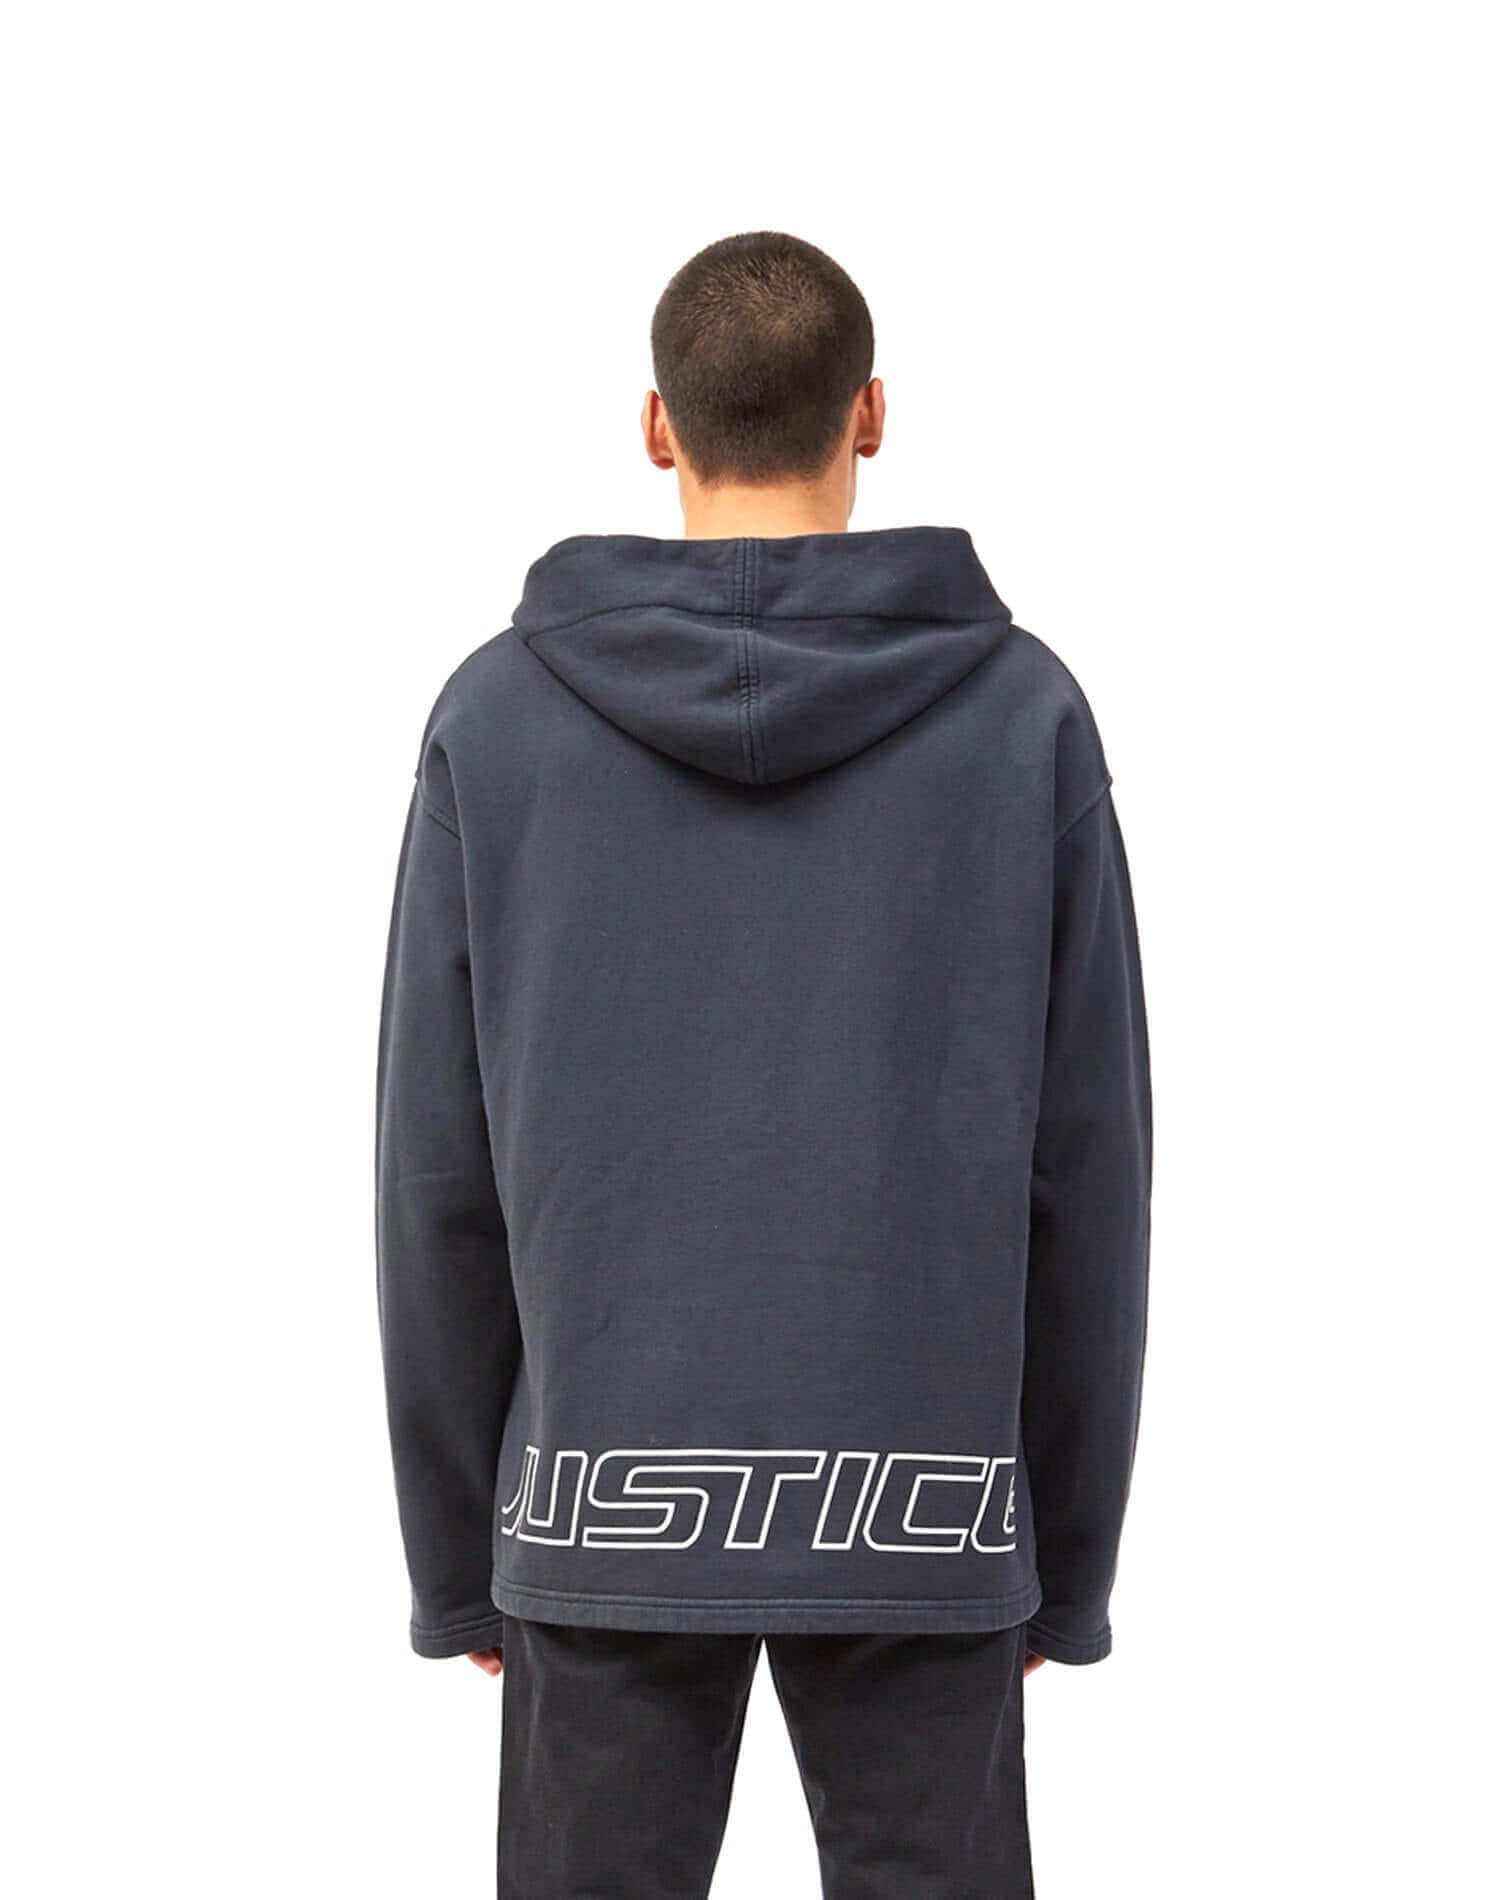 Justice Sweater Hoodie with frontal fanny pack pocket. 'JUSTICE' print on the back. 100% cotton. Made in Italy. HTC LOS ANGELES